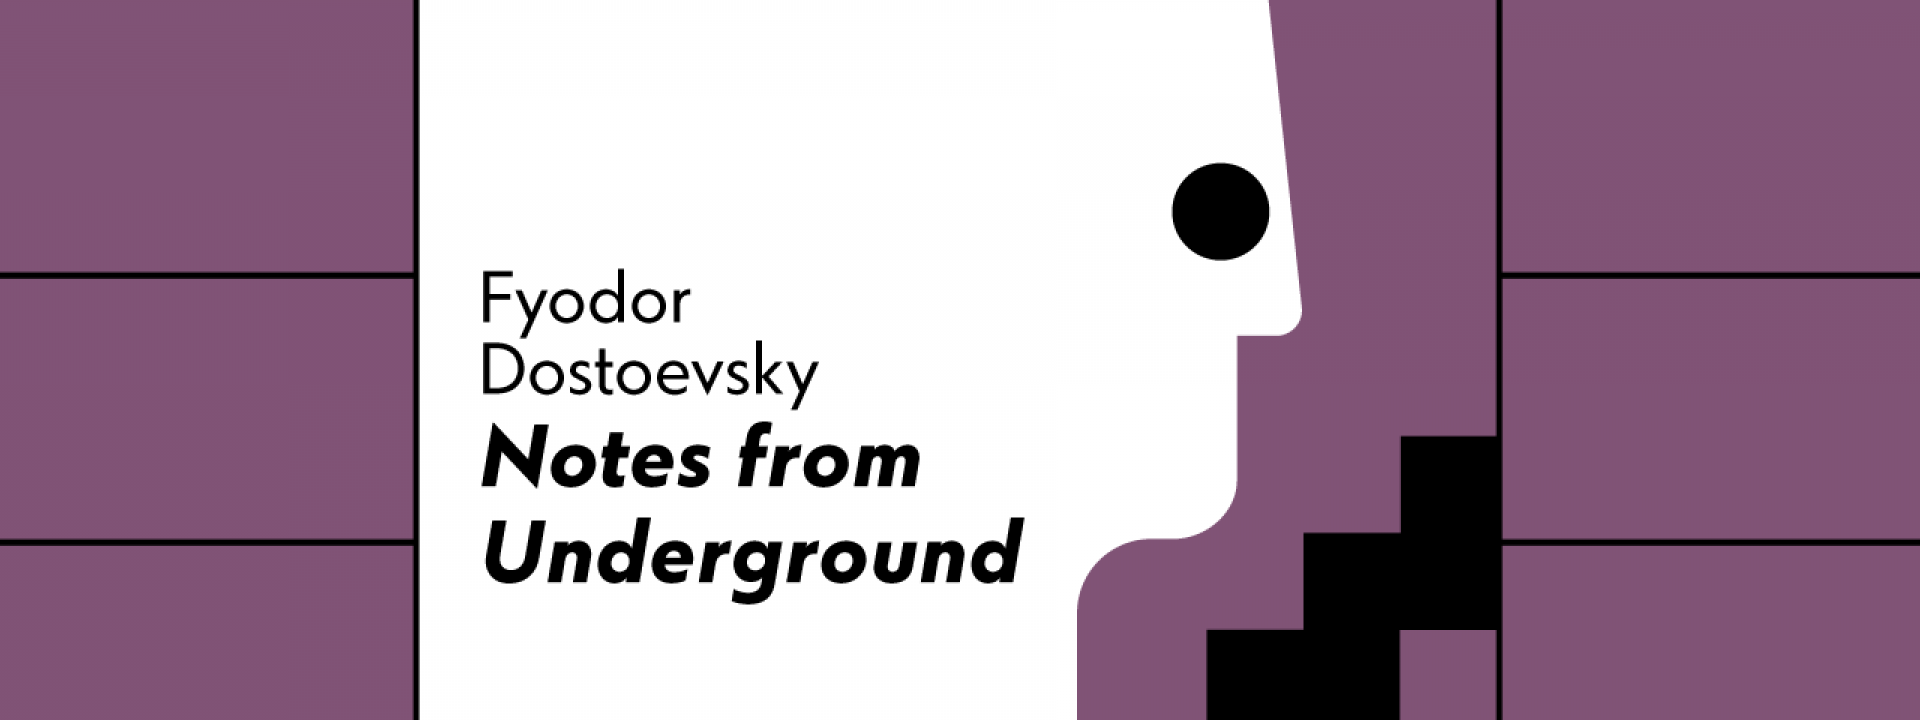 Parabases: Faces of the Hero | Fyodor Dostoevsky, Notes from Underground - Εικόνα